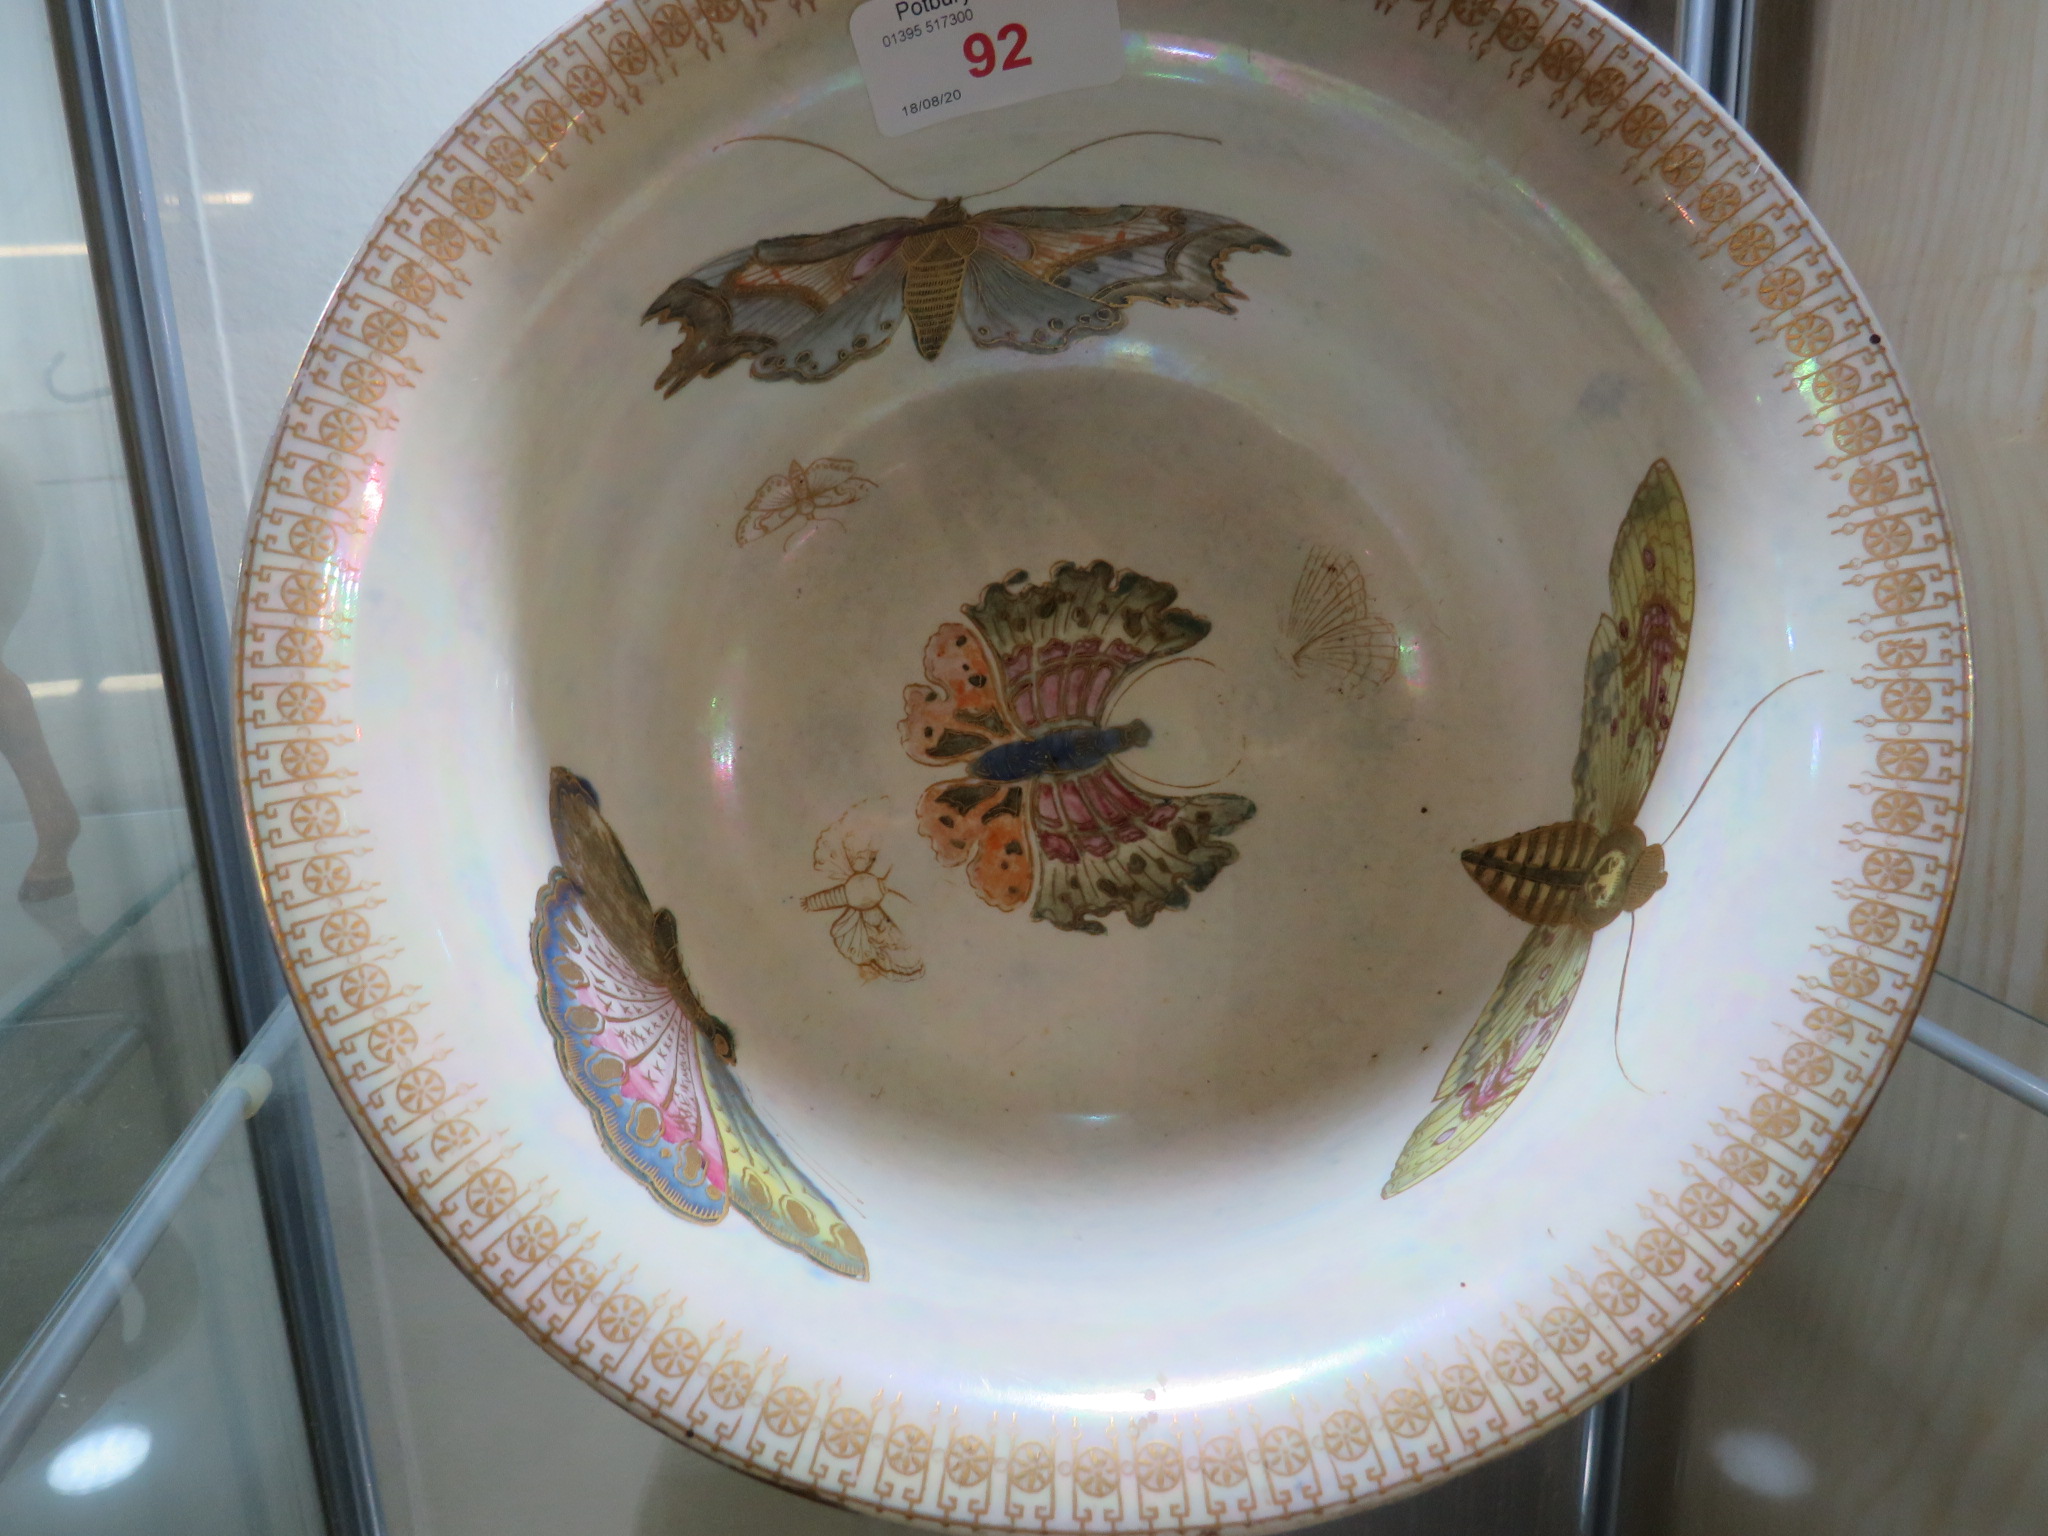 CARLTON WARE LUSTRE BOWL ON FOOT DECORATED WITH MOTHS AND BUTTERFLIES, THE EXTERIOR MOTTLED BLUE - Image 2 of 4